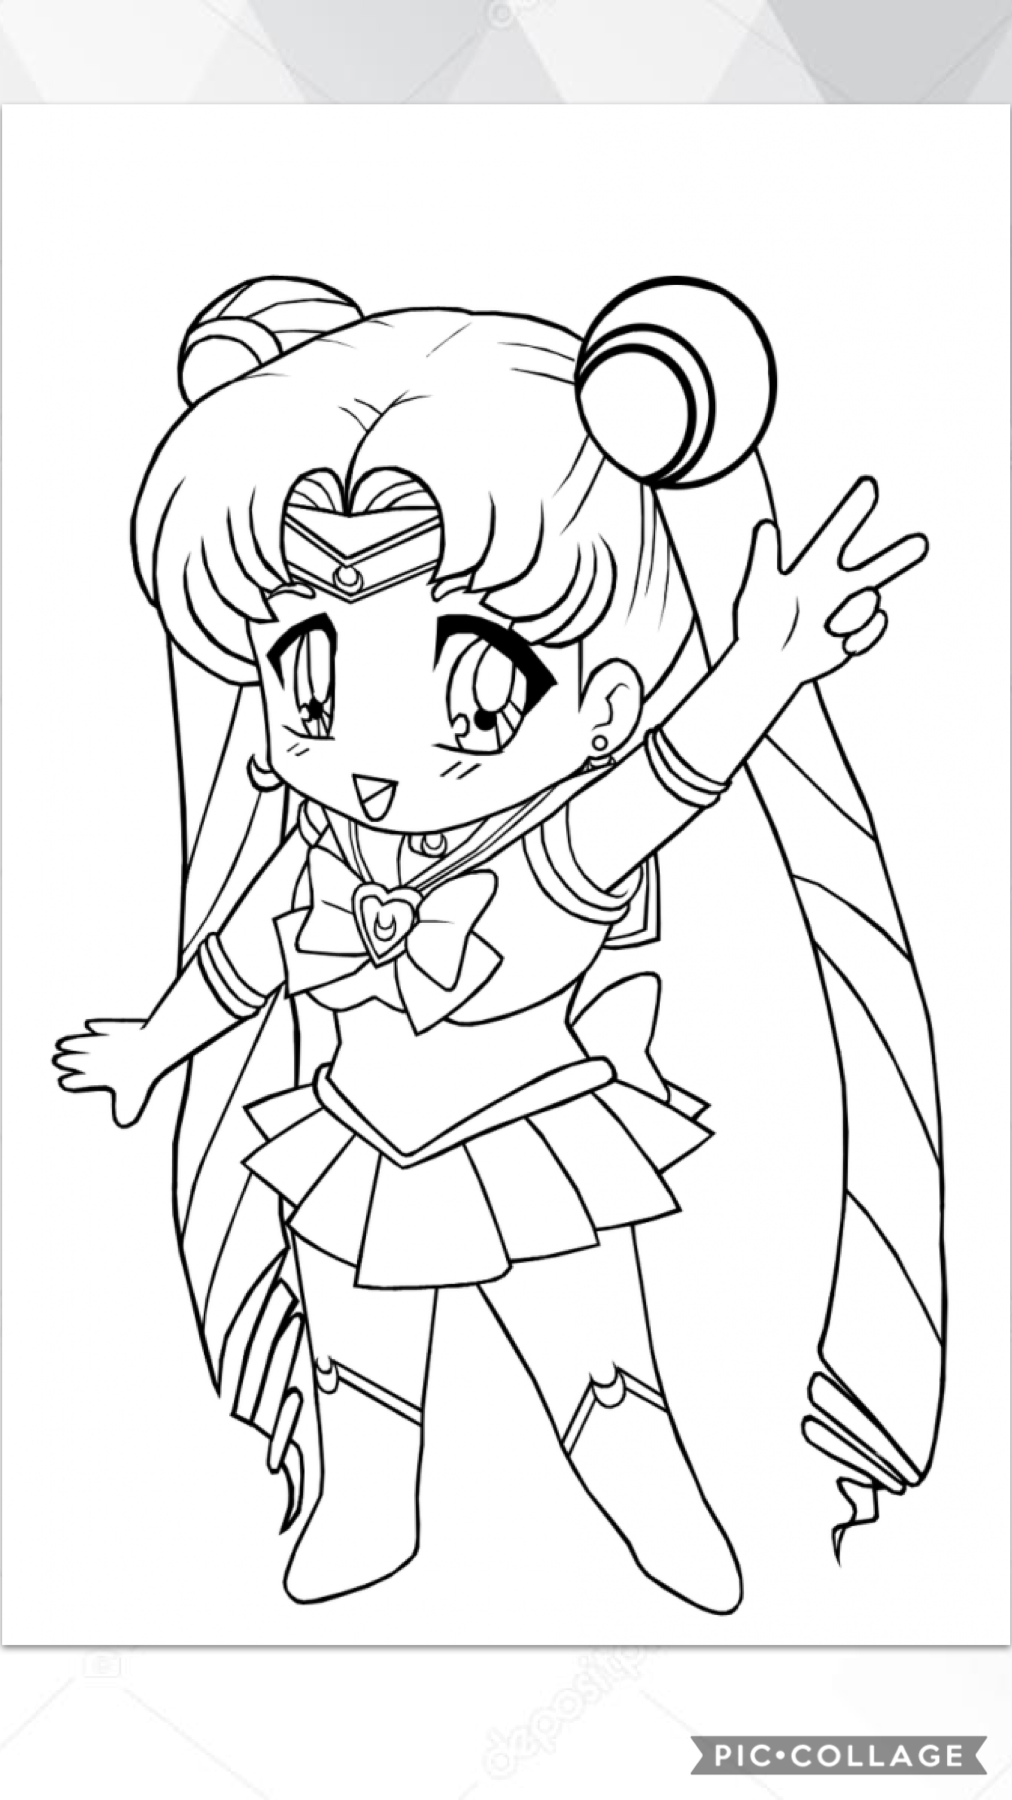 Here’s a fun salor moon coloring sheet! Sorry we haven’t been active much! We’re pretty busy